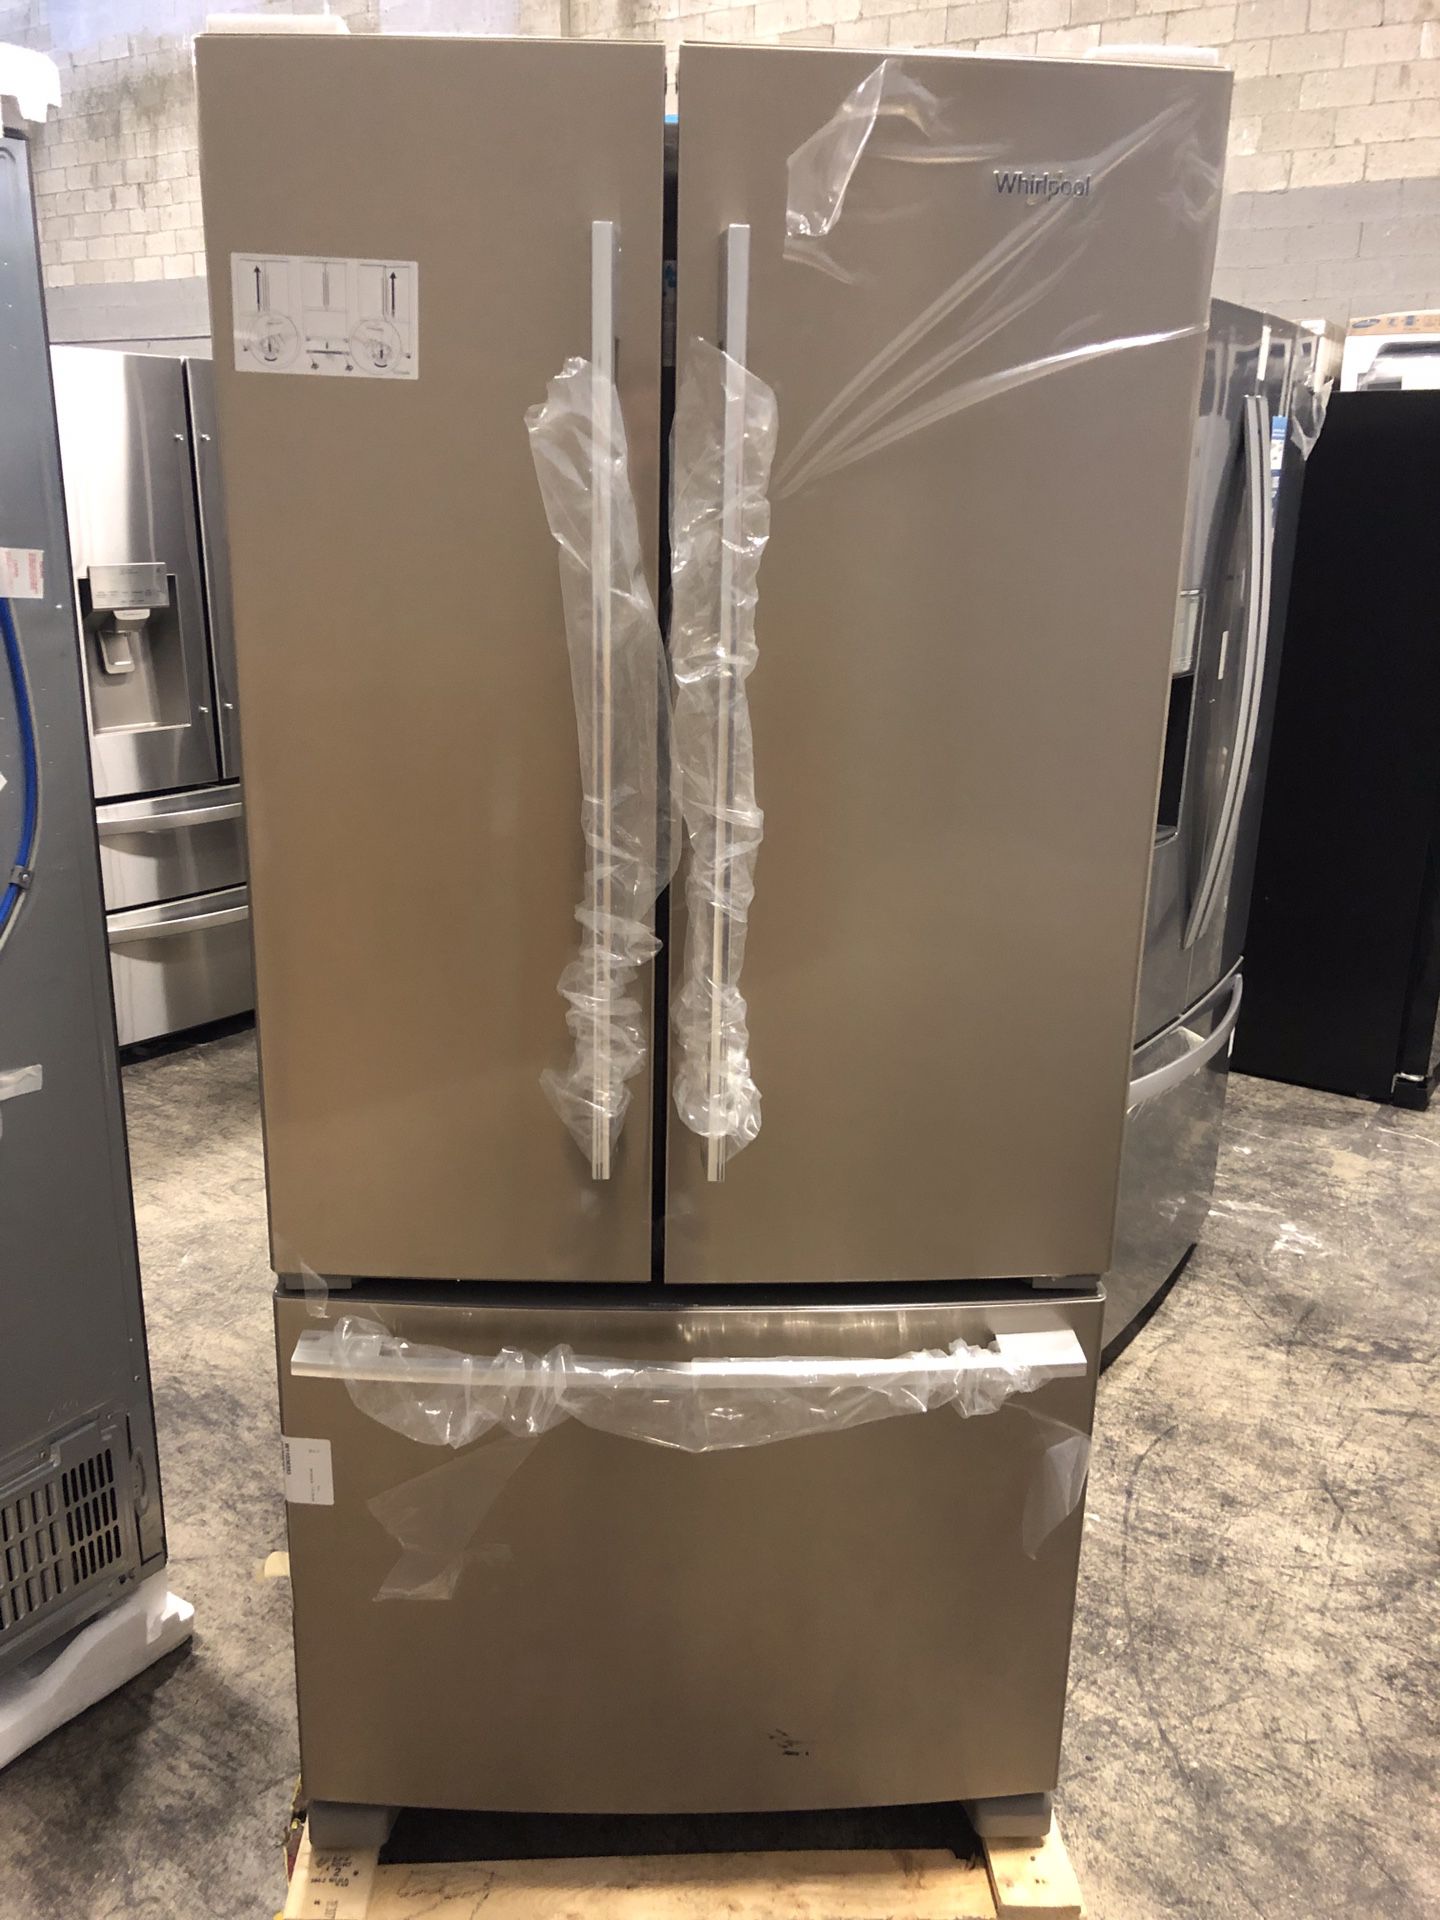 Whirlpool 22 cu. ft. French Door Refrigerator in Sunset Bronze EZ FINANCING AVAILABLE !